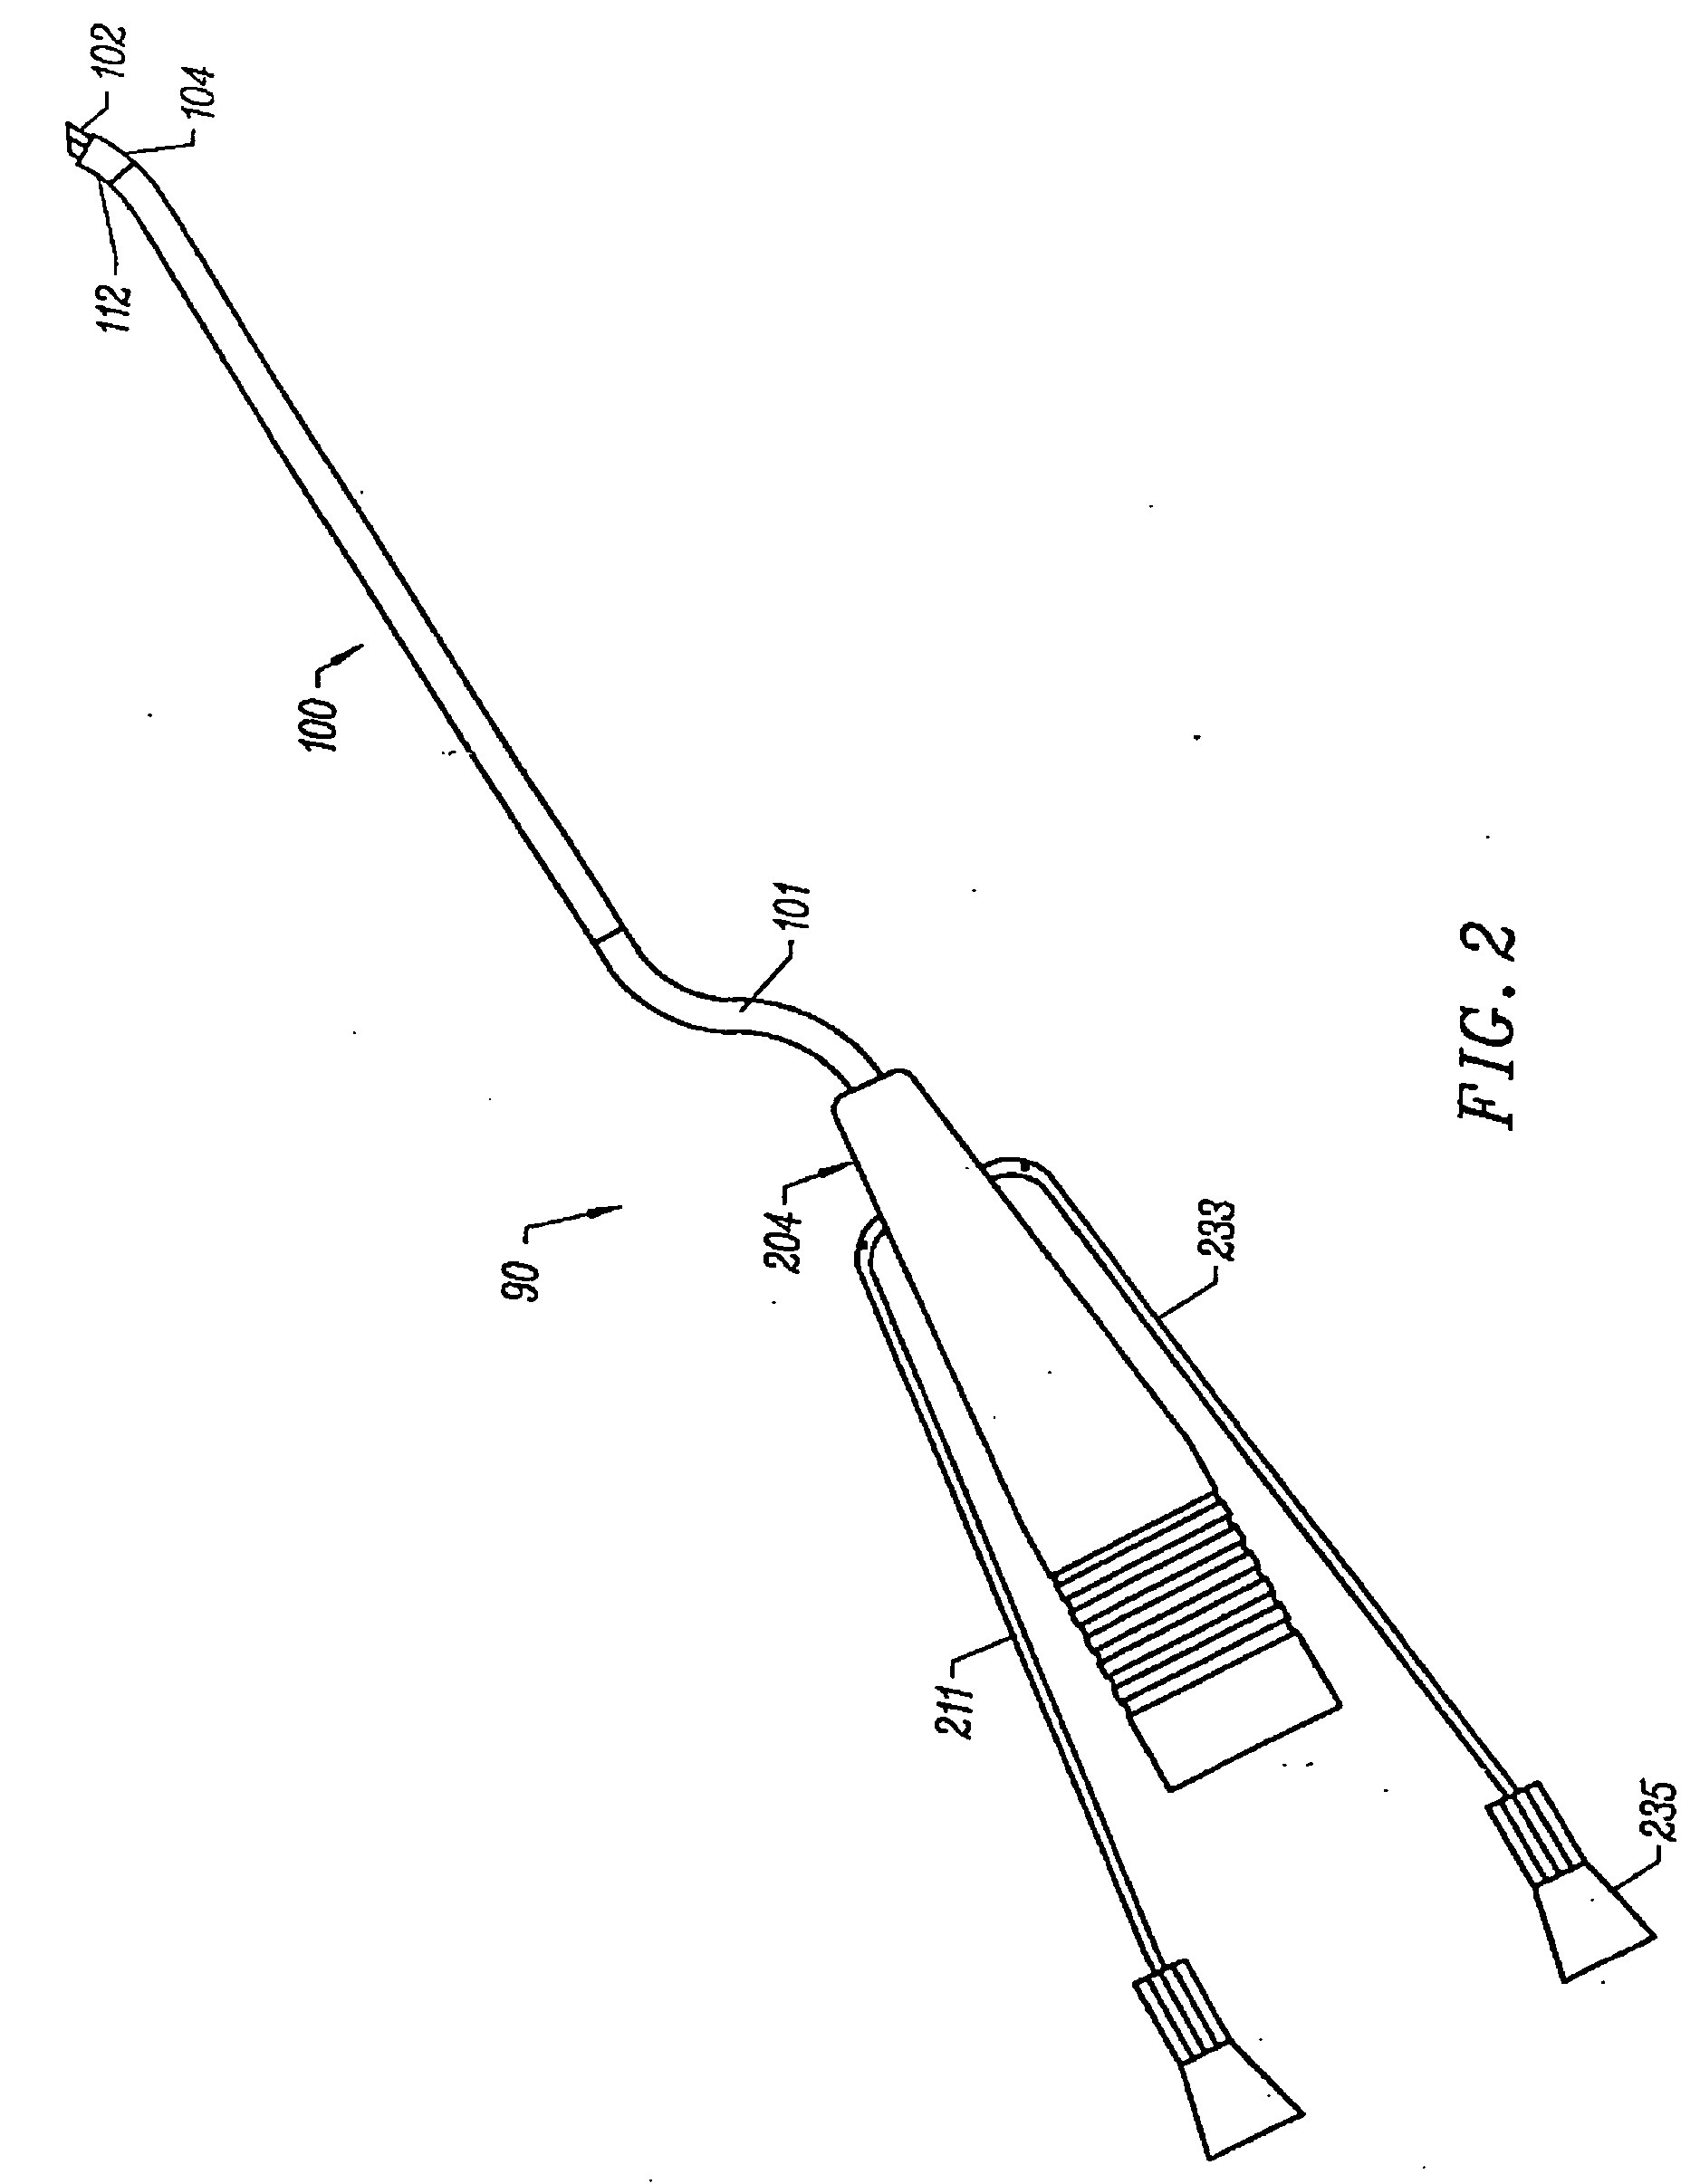 Systems and methods for electrosurgical treatment of obstructive sleep disorders